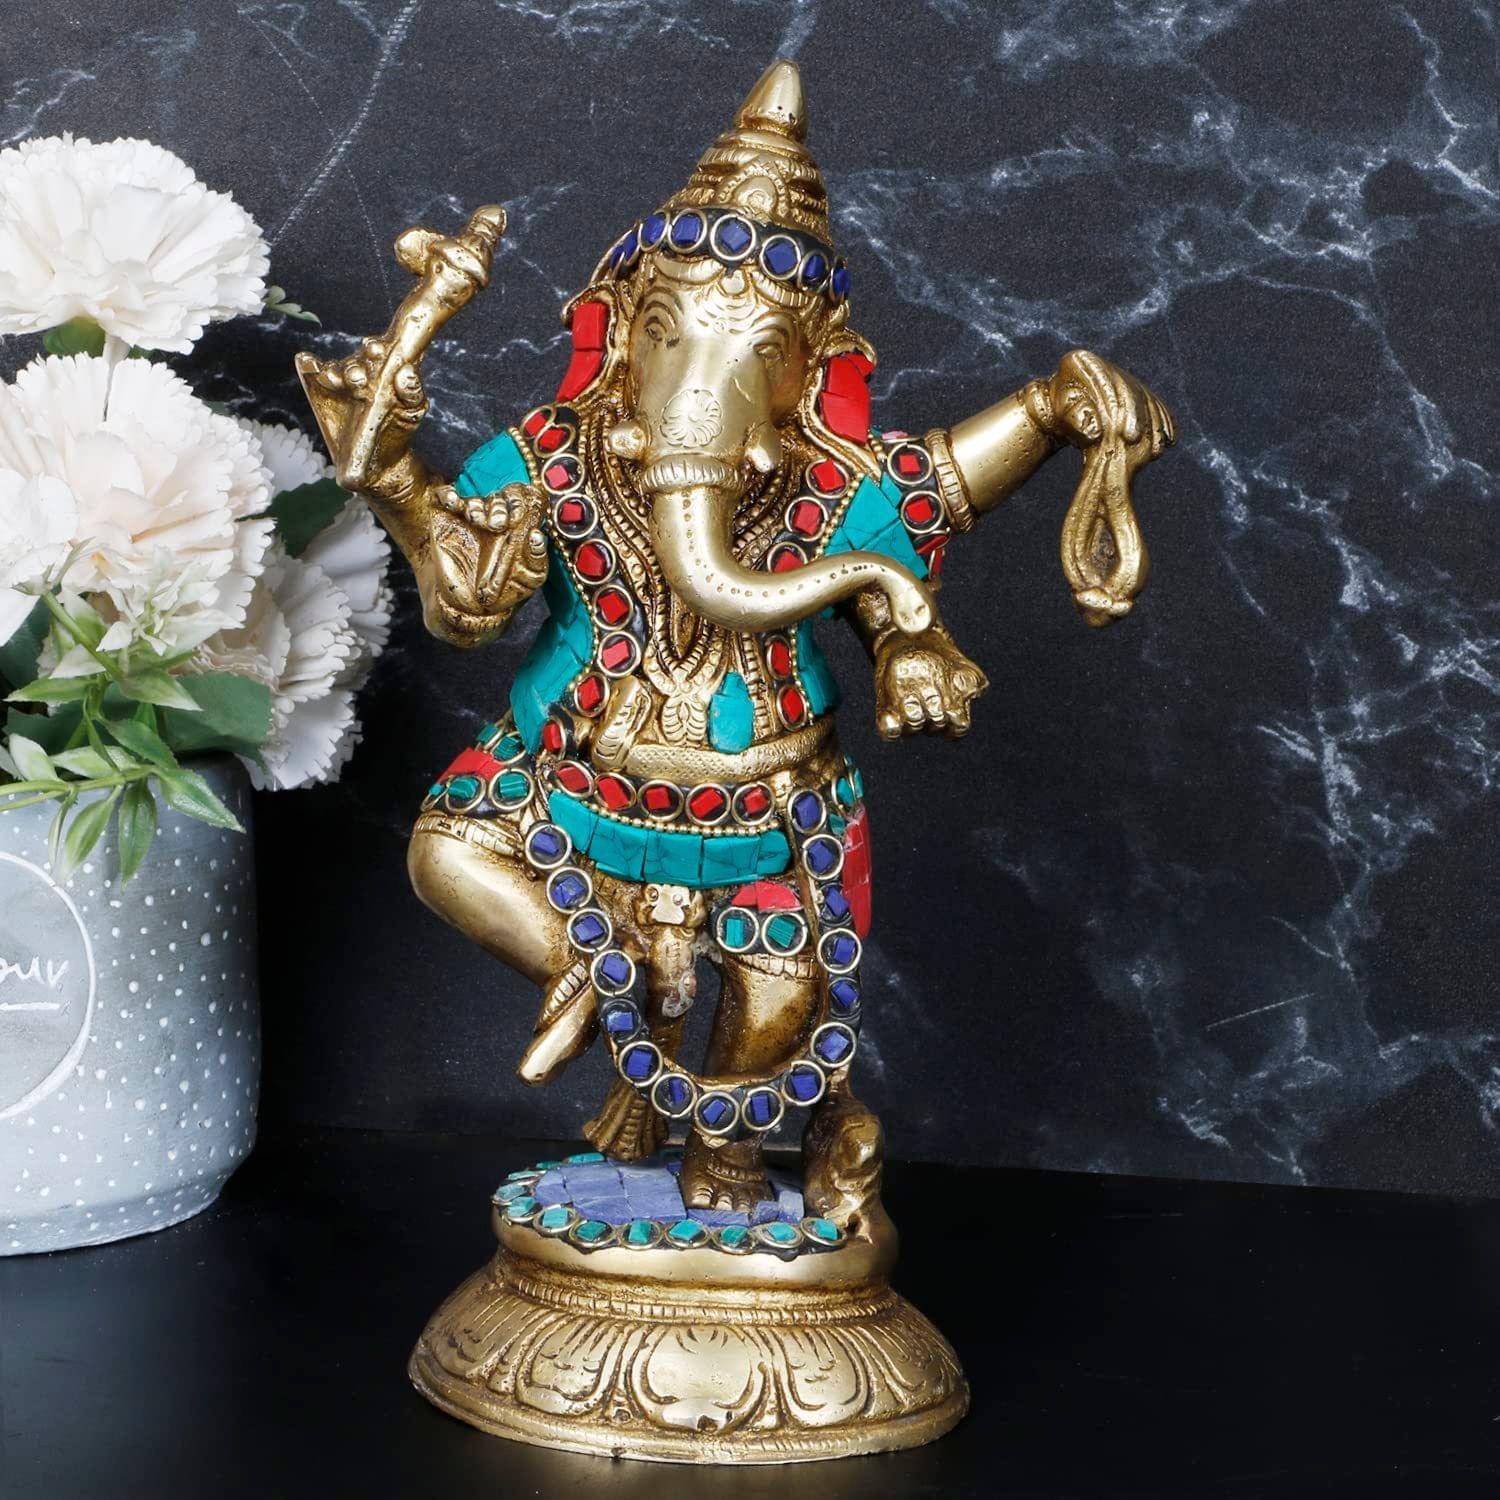 Buy CraftVatika Ganesh Idol Murti Showpiece for Home Decor Gift Gold Plated  Metal Lord Ganesha Sitting on Moon Idols Statue Good Luck & Success Online  at Low Prices in India - Amazon.in